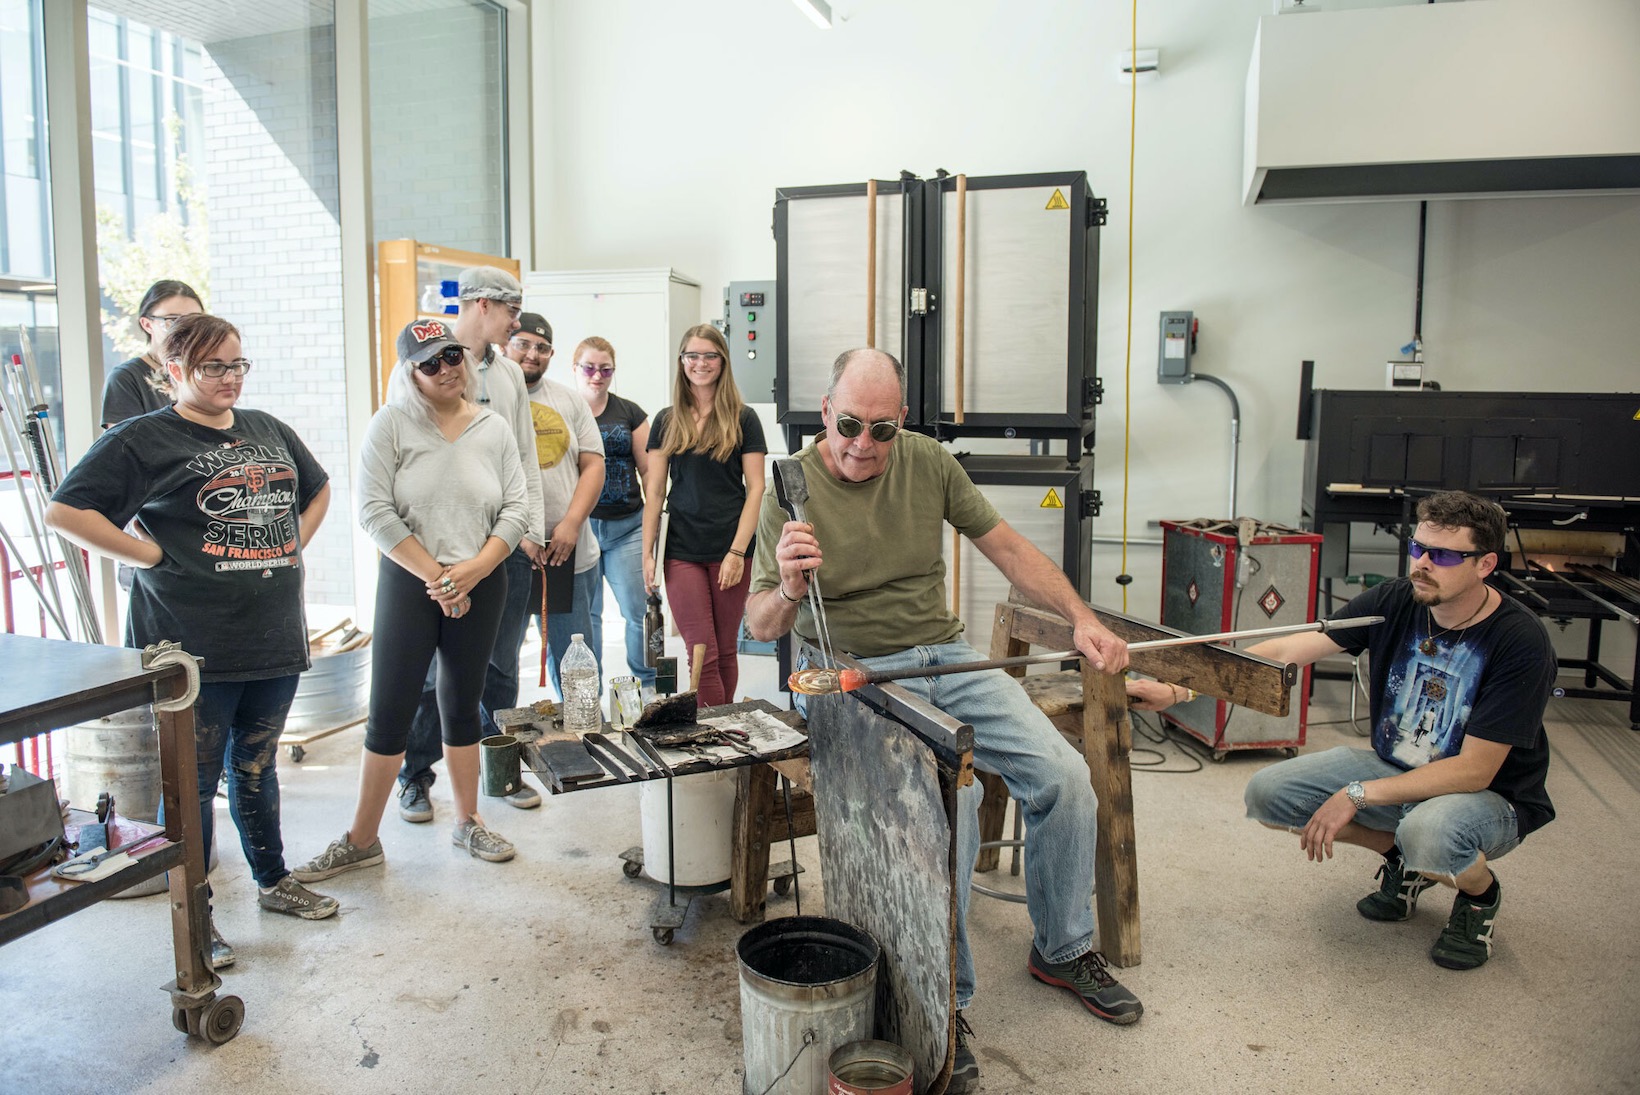 Students stand behind Robert Herhusky as he sits and demonstrates a glassblowing technique